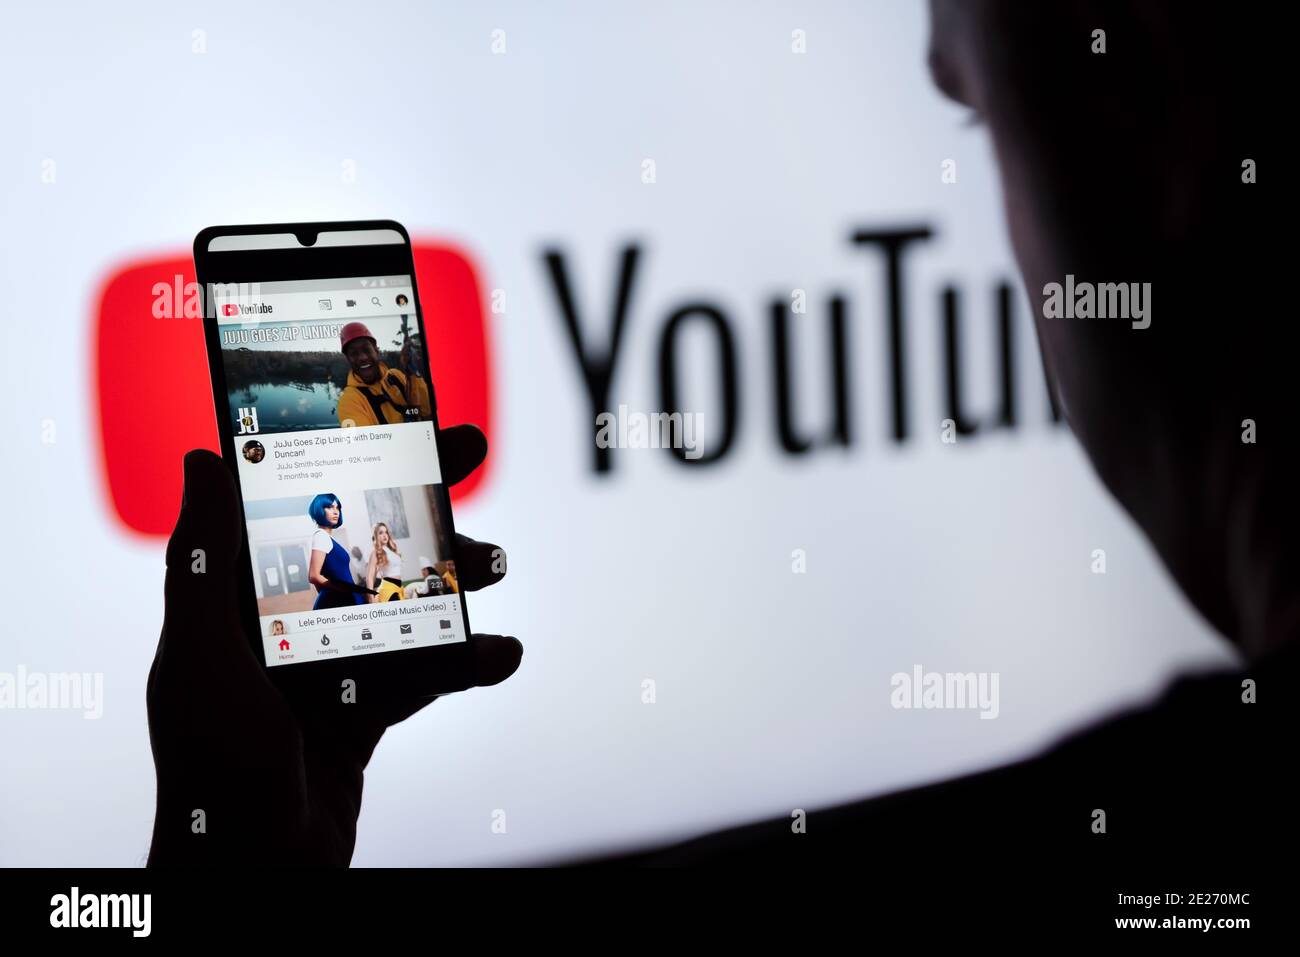 Wroclaw, Poland - SEP 16, 2020: Man holding smart phone with YouTube logo on screen. YouTube is most popular video service developed by Google. Stock Photo